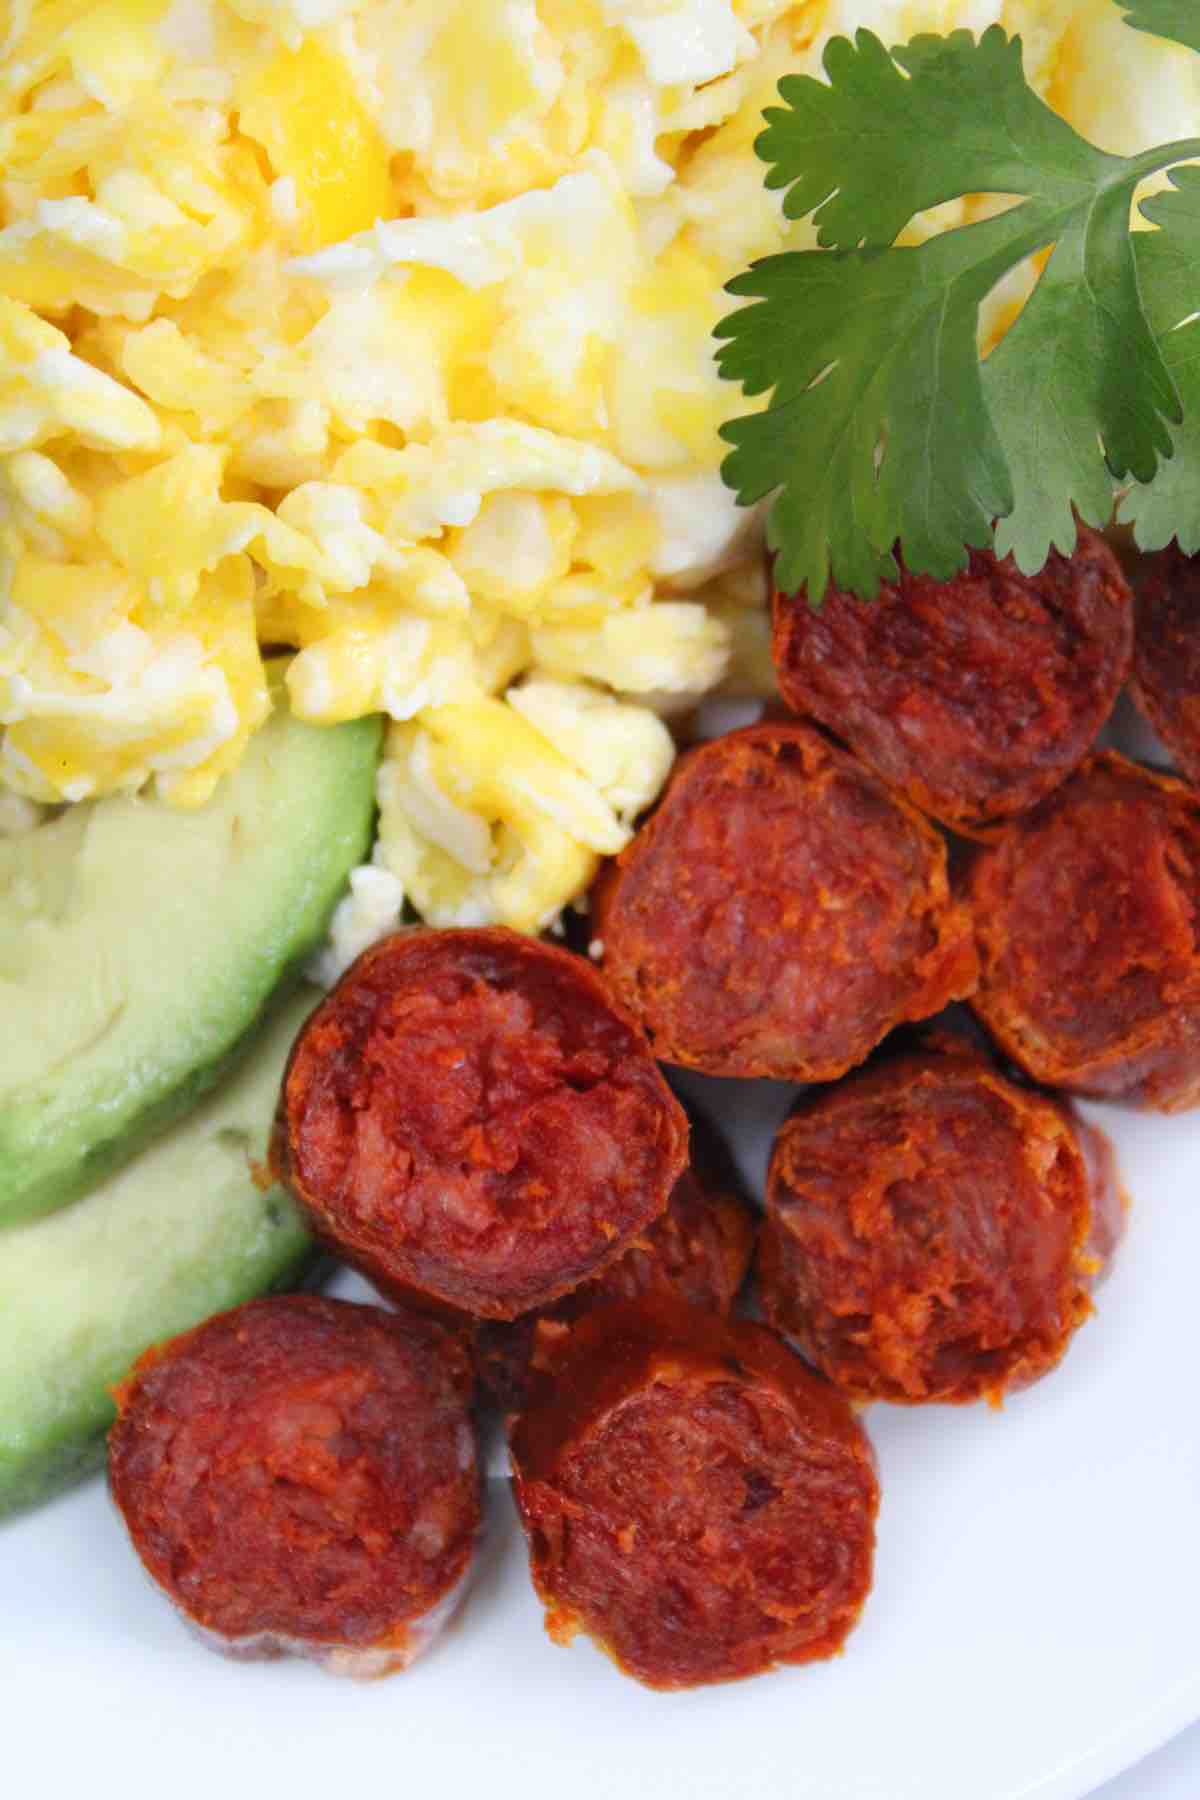 Serve air fryer Mexican or Spanish chorizo with scrambled eggs and avocado.